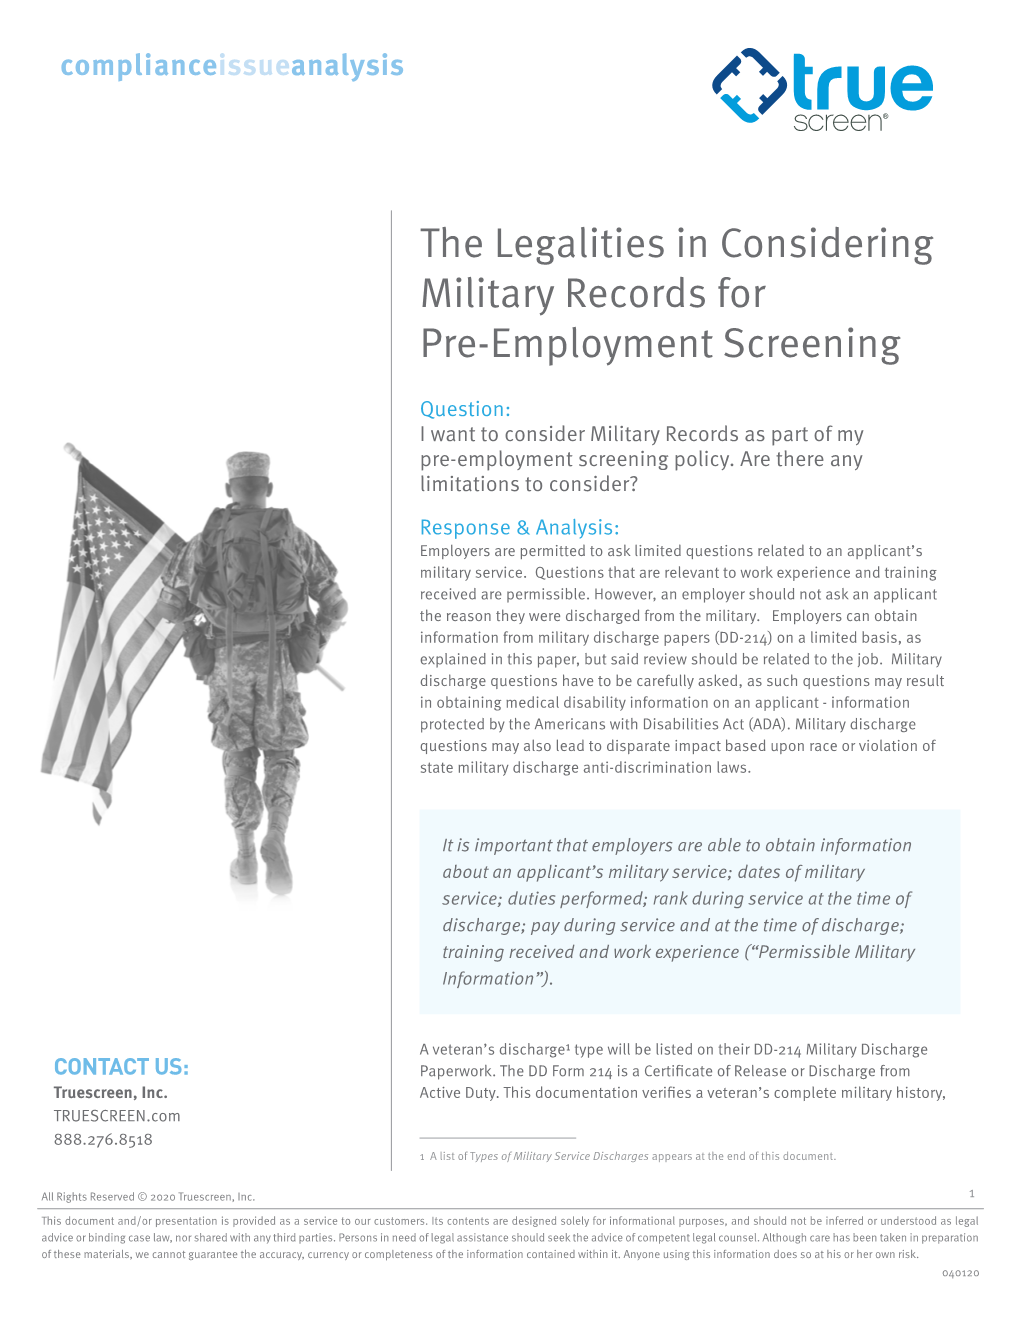 The Legalities in Considering Military Records for Pre-Employment Screening